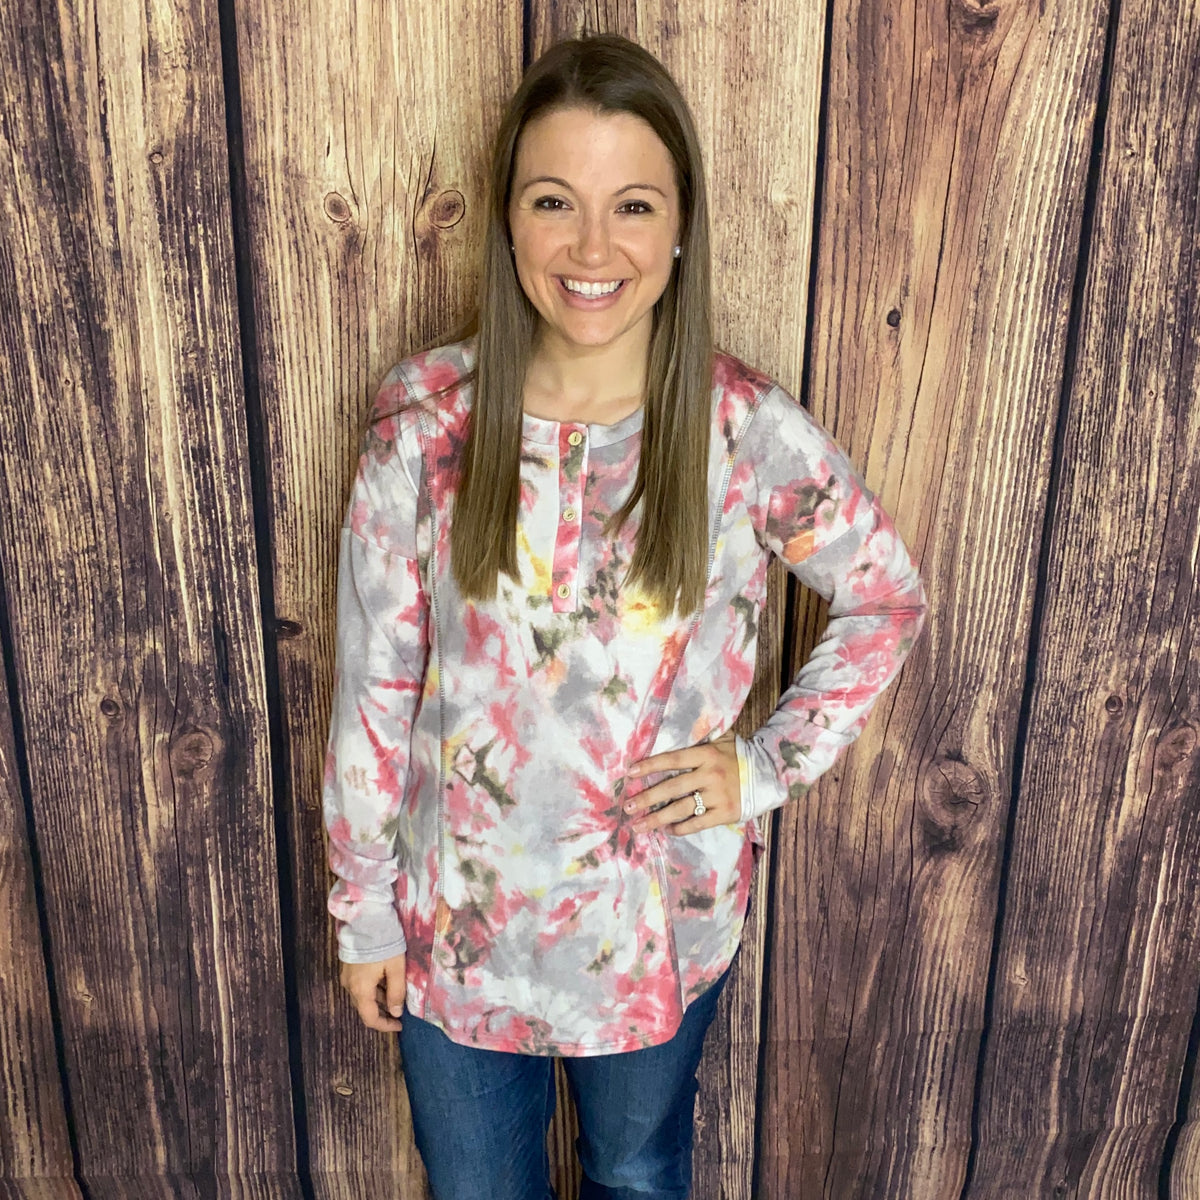 SEW IN LOVE GREY/PINK/YELLOW FLORAL LONG SLEEVE TOP W/FRONT BUTTONS